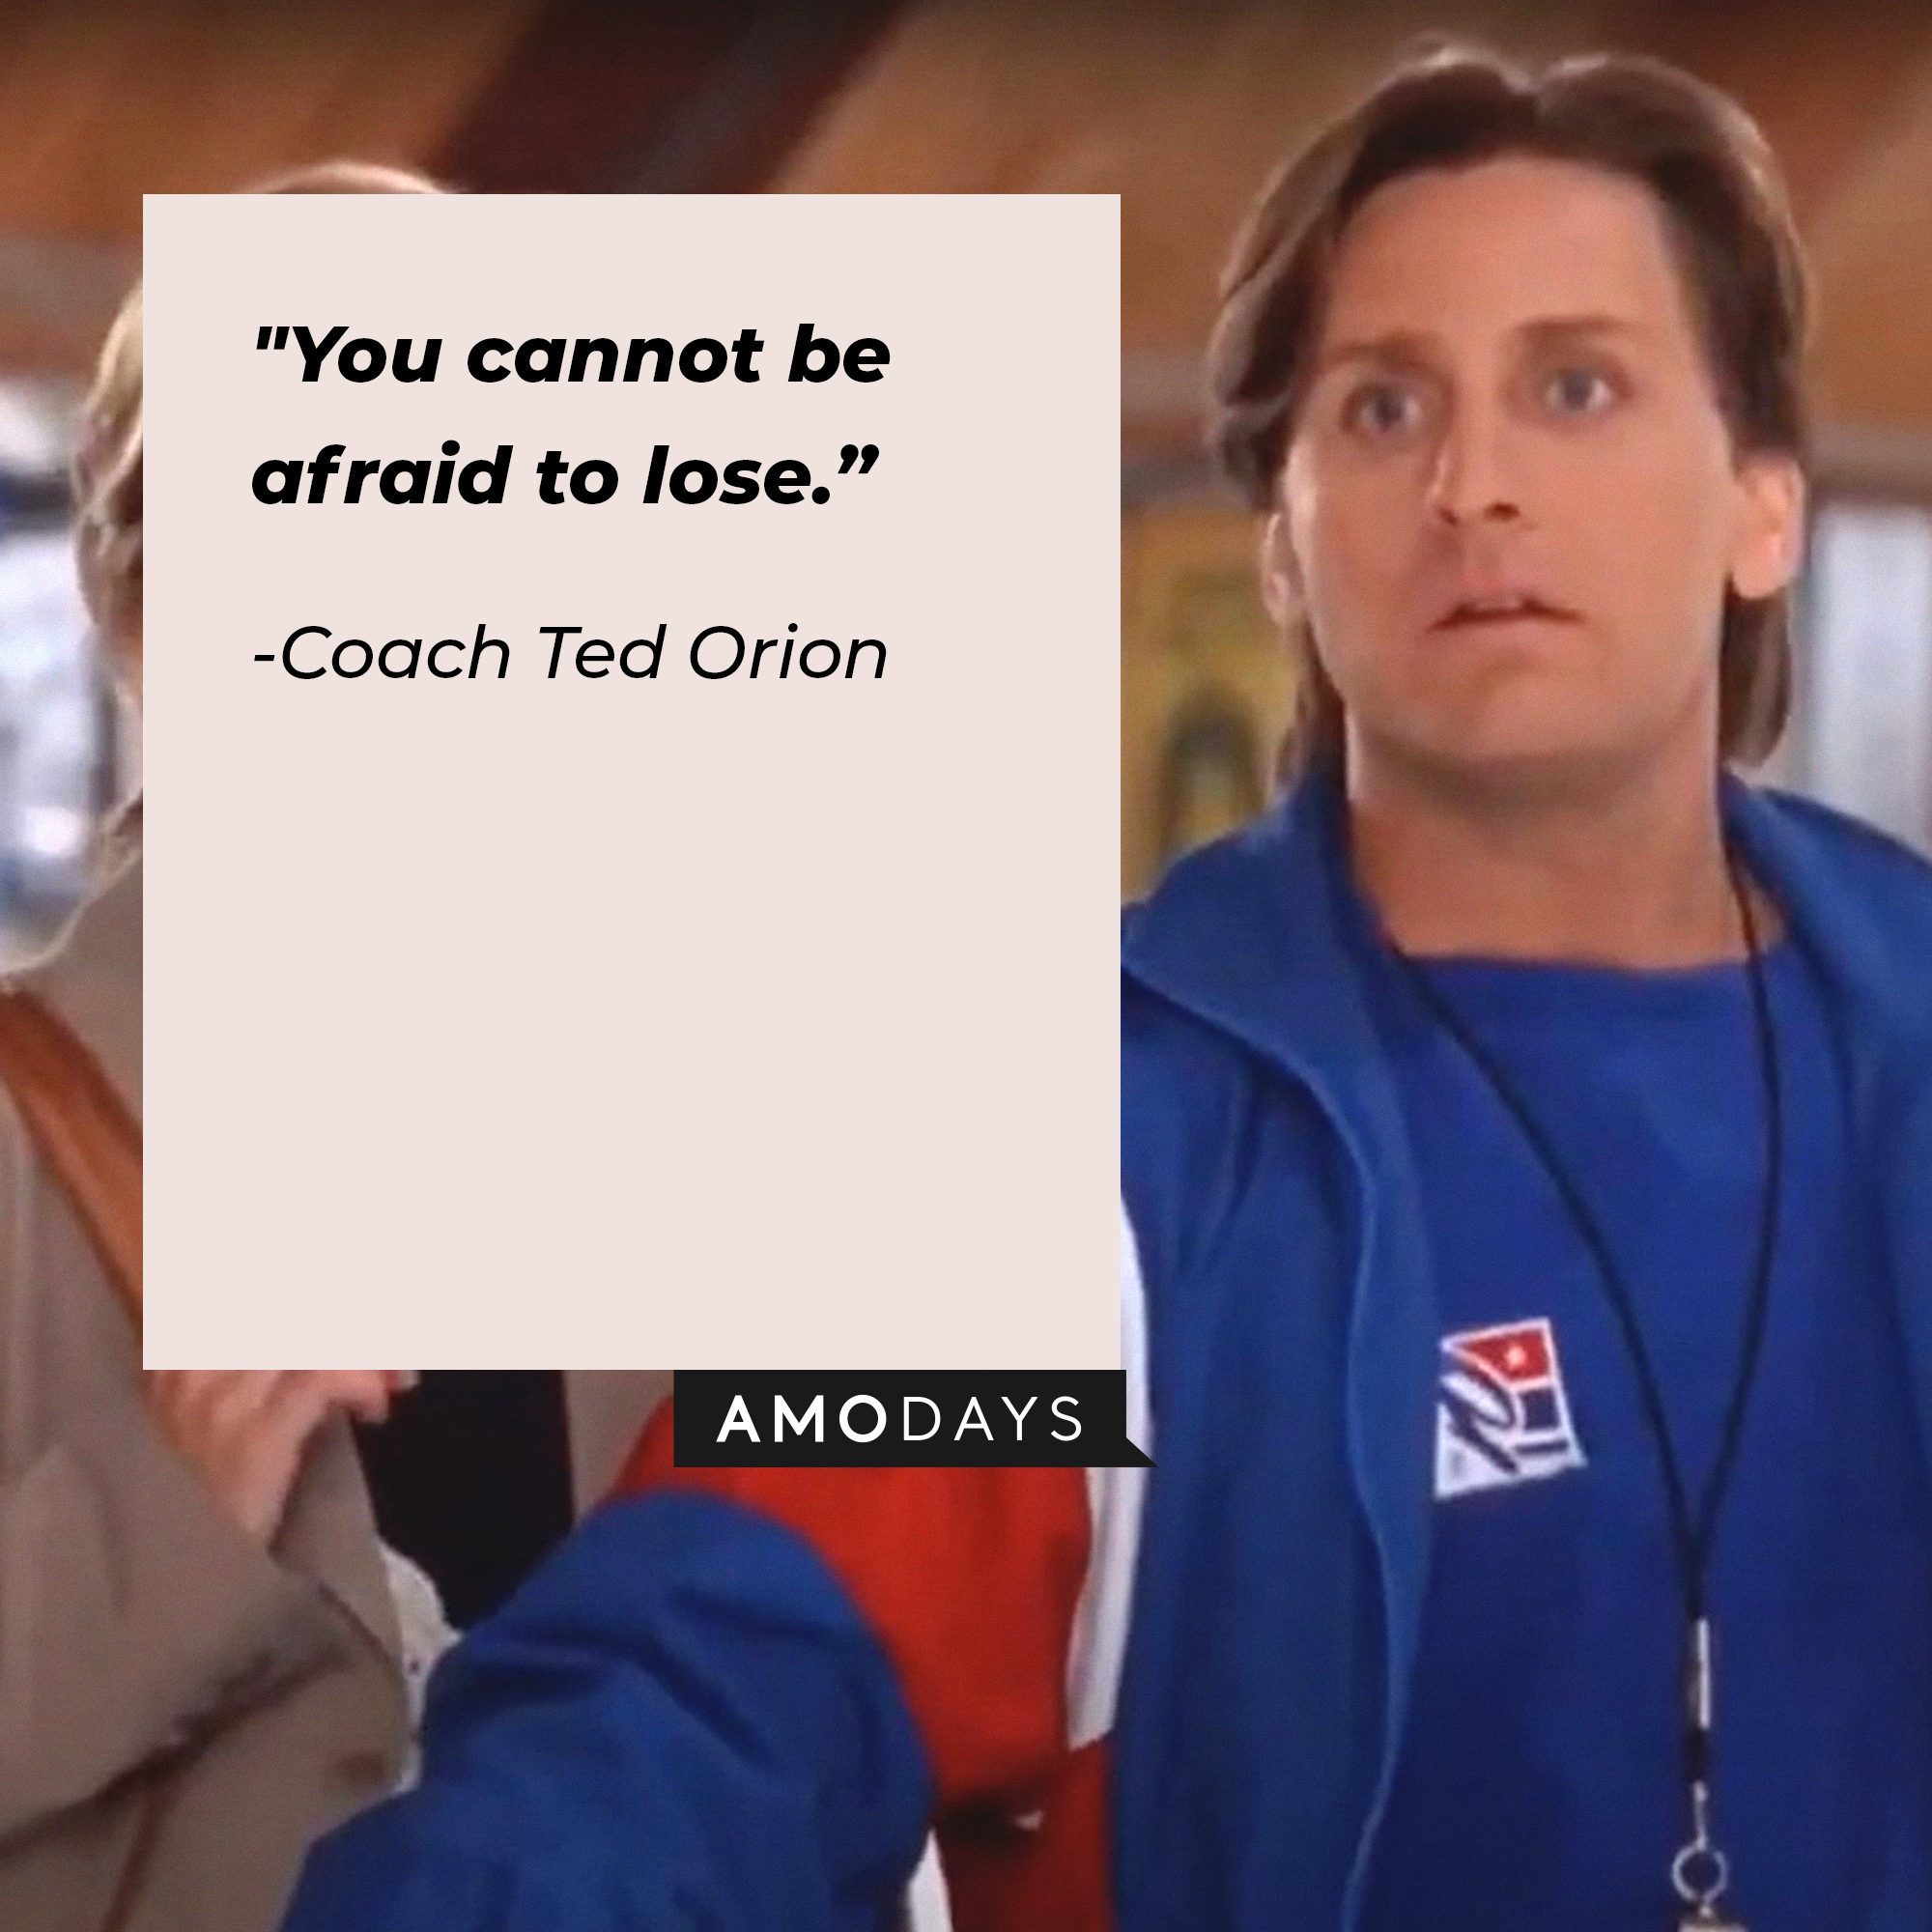 A picture of Coach Ted Orion with a quote by him :"You cannot be afraid to lose.” | Source: youtube.com/disneyplus